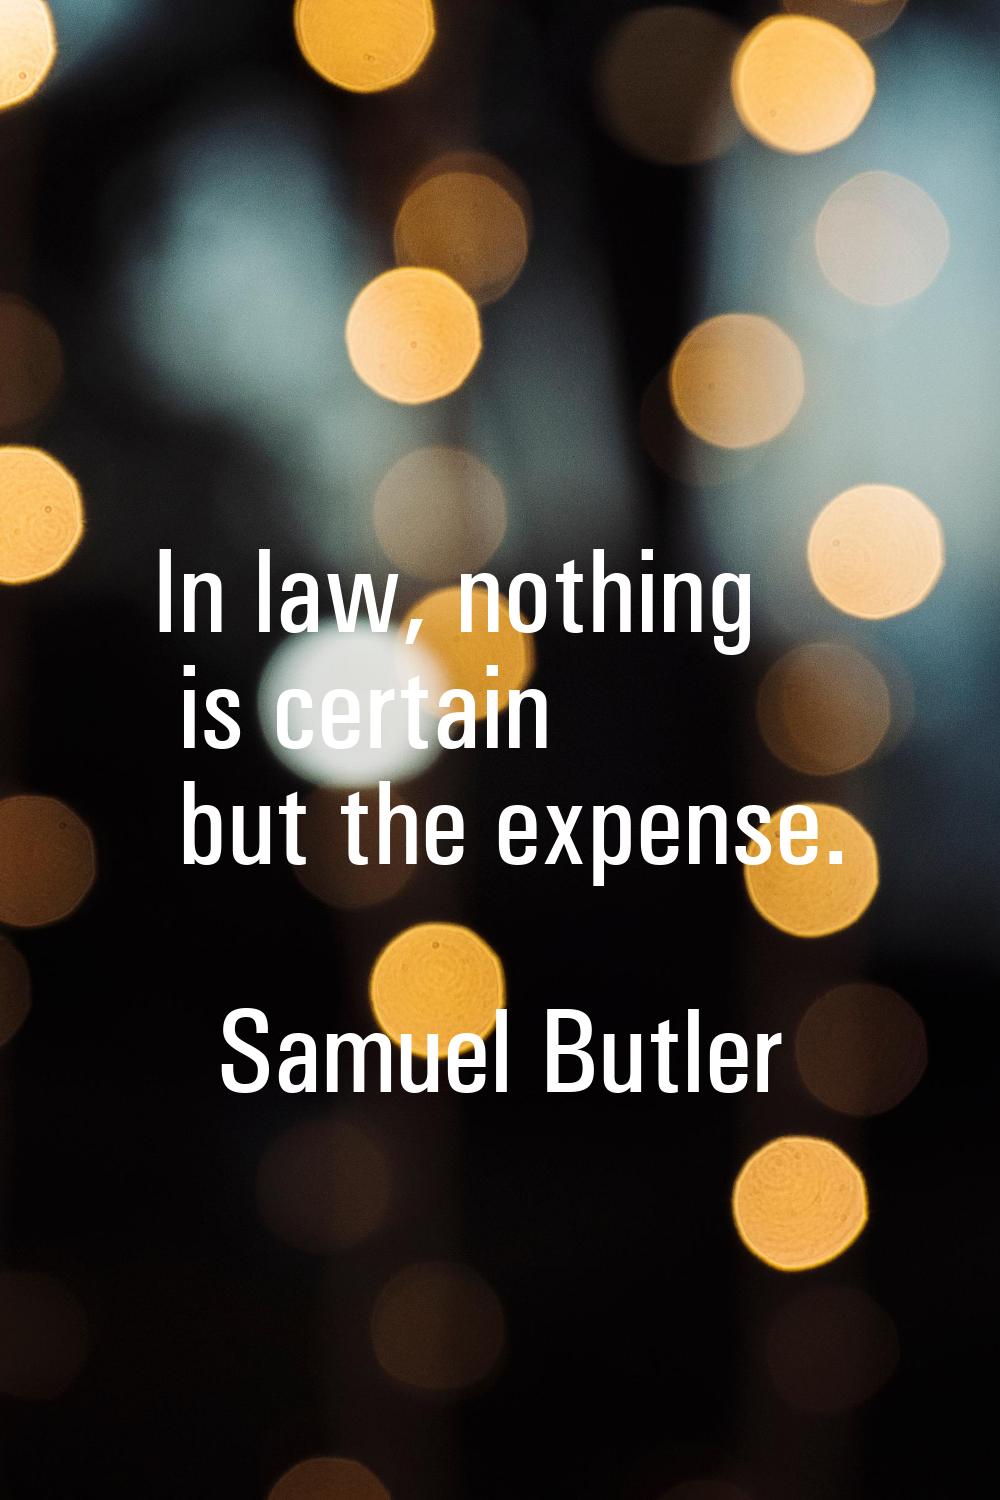 In law, nothing is certain but the expense.